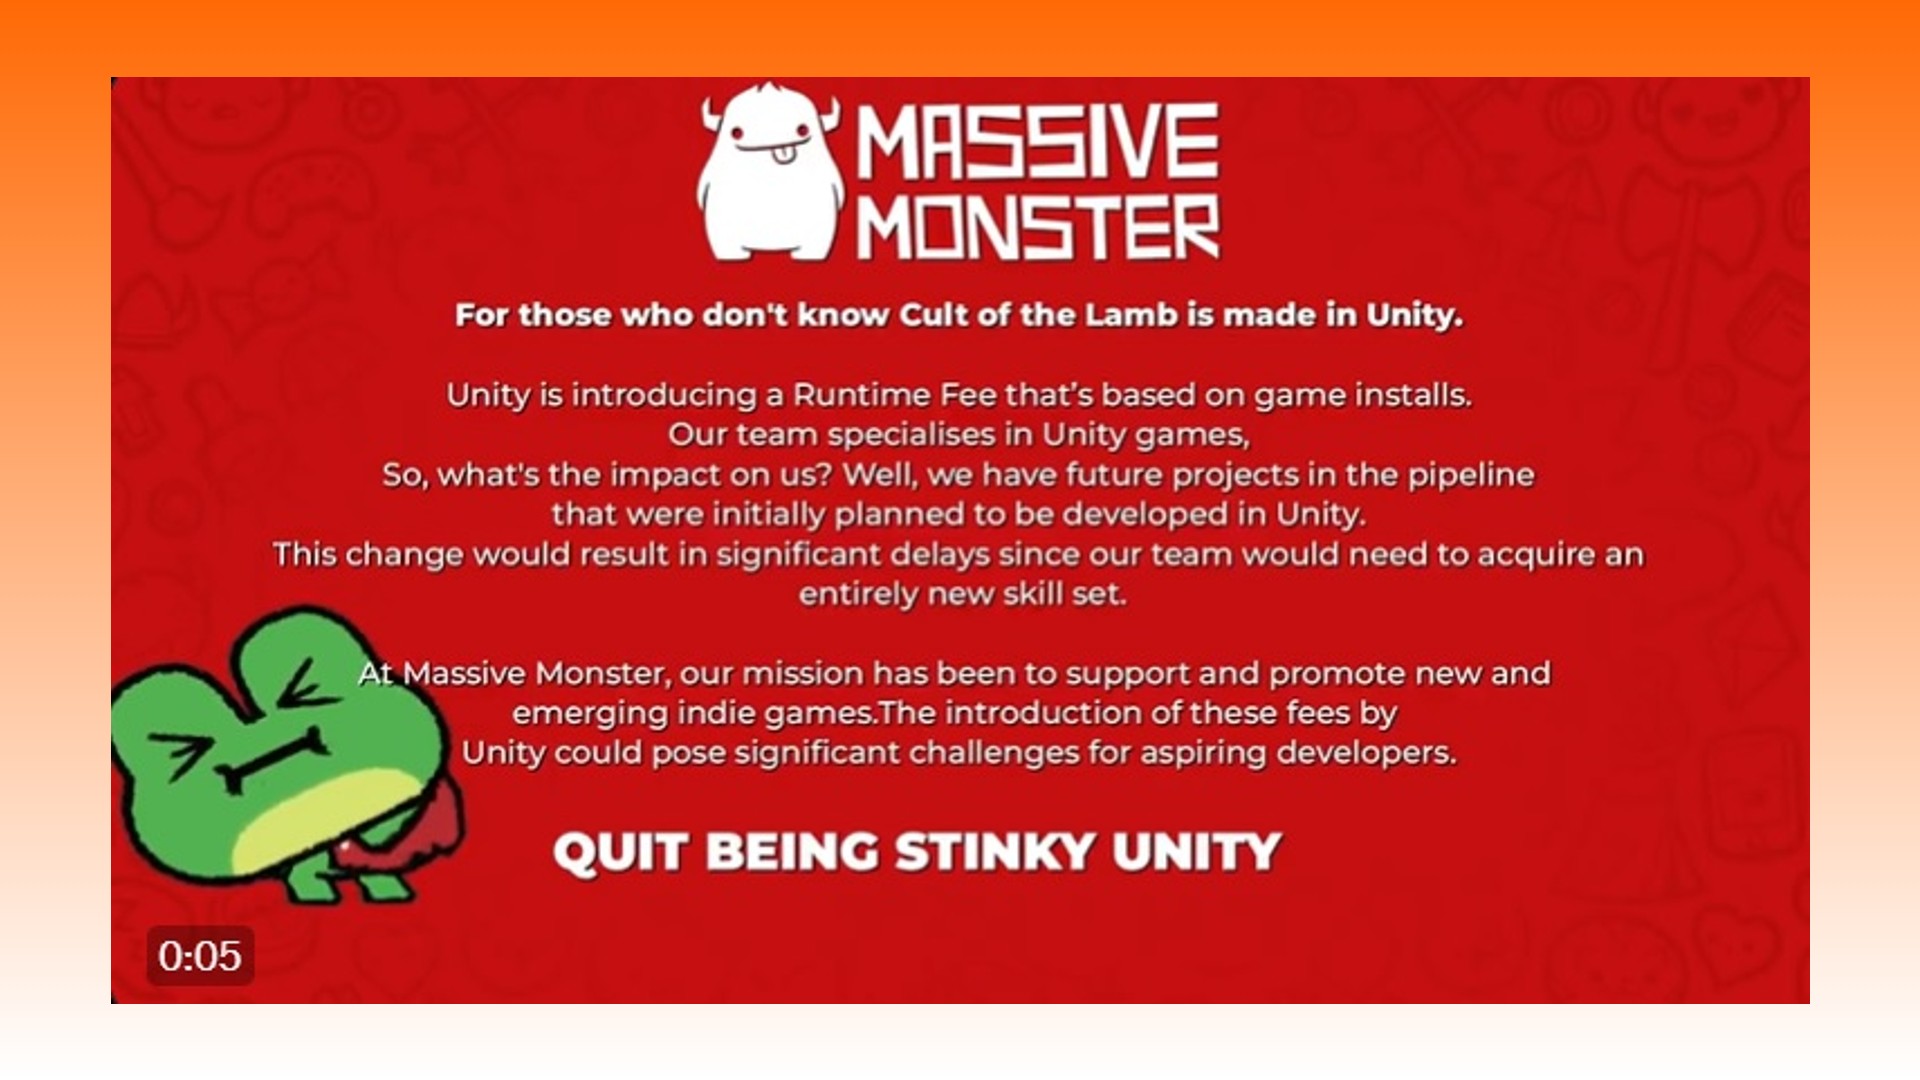 Cult of the Lamb deleted: A statement from Massive Monster, creator of roguelike game Cult of the Lamb